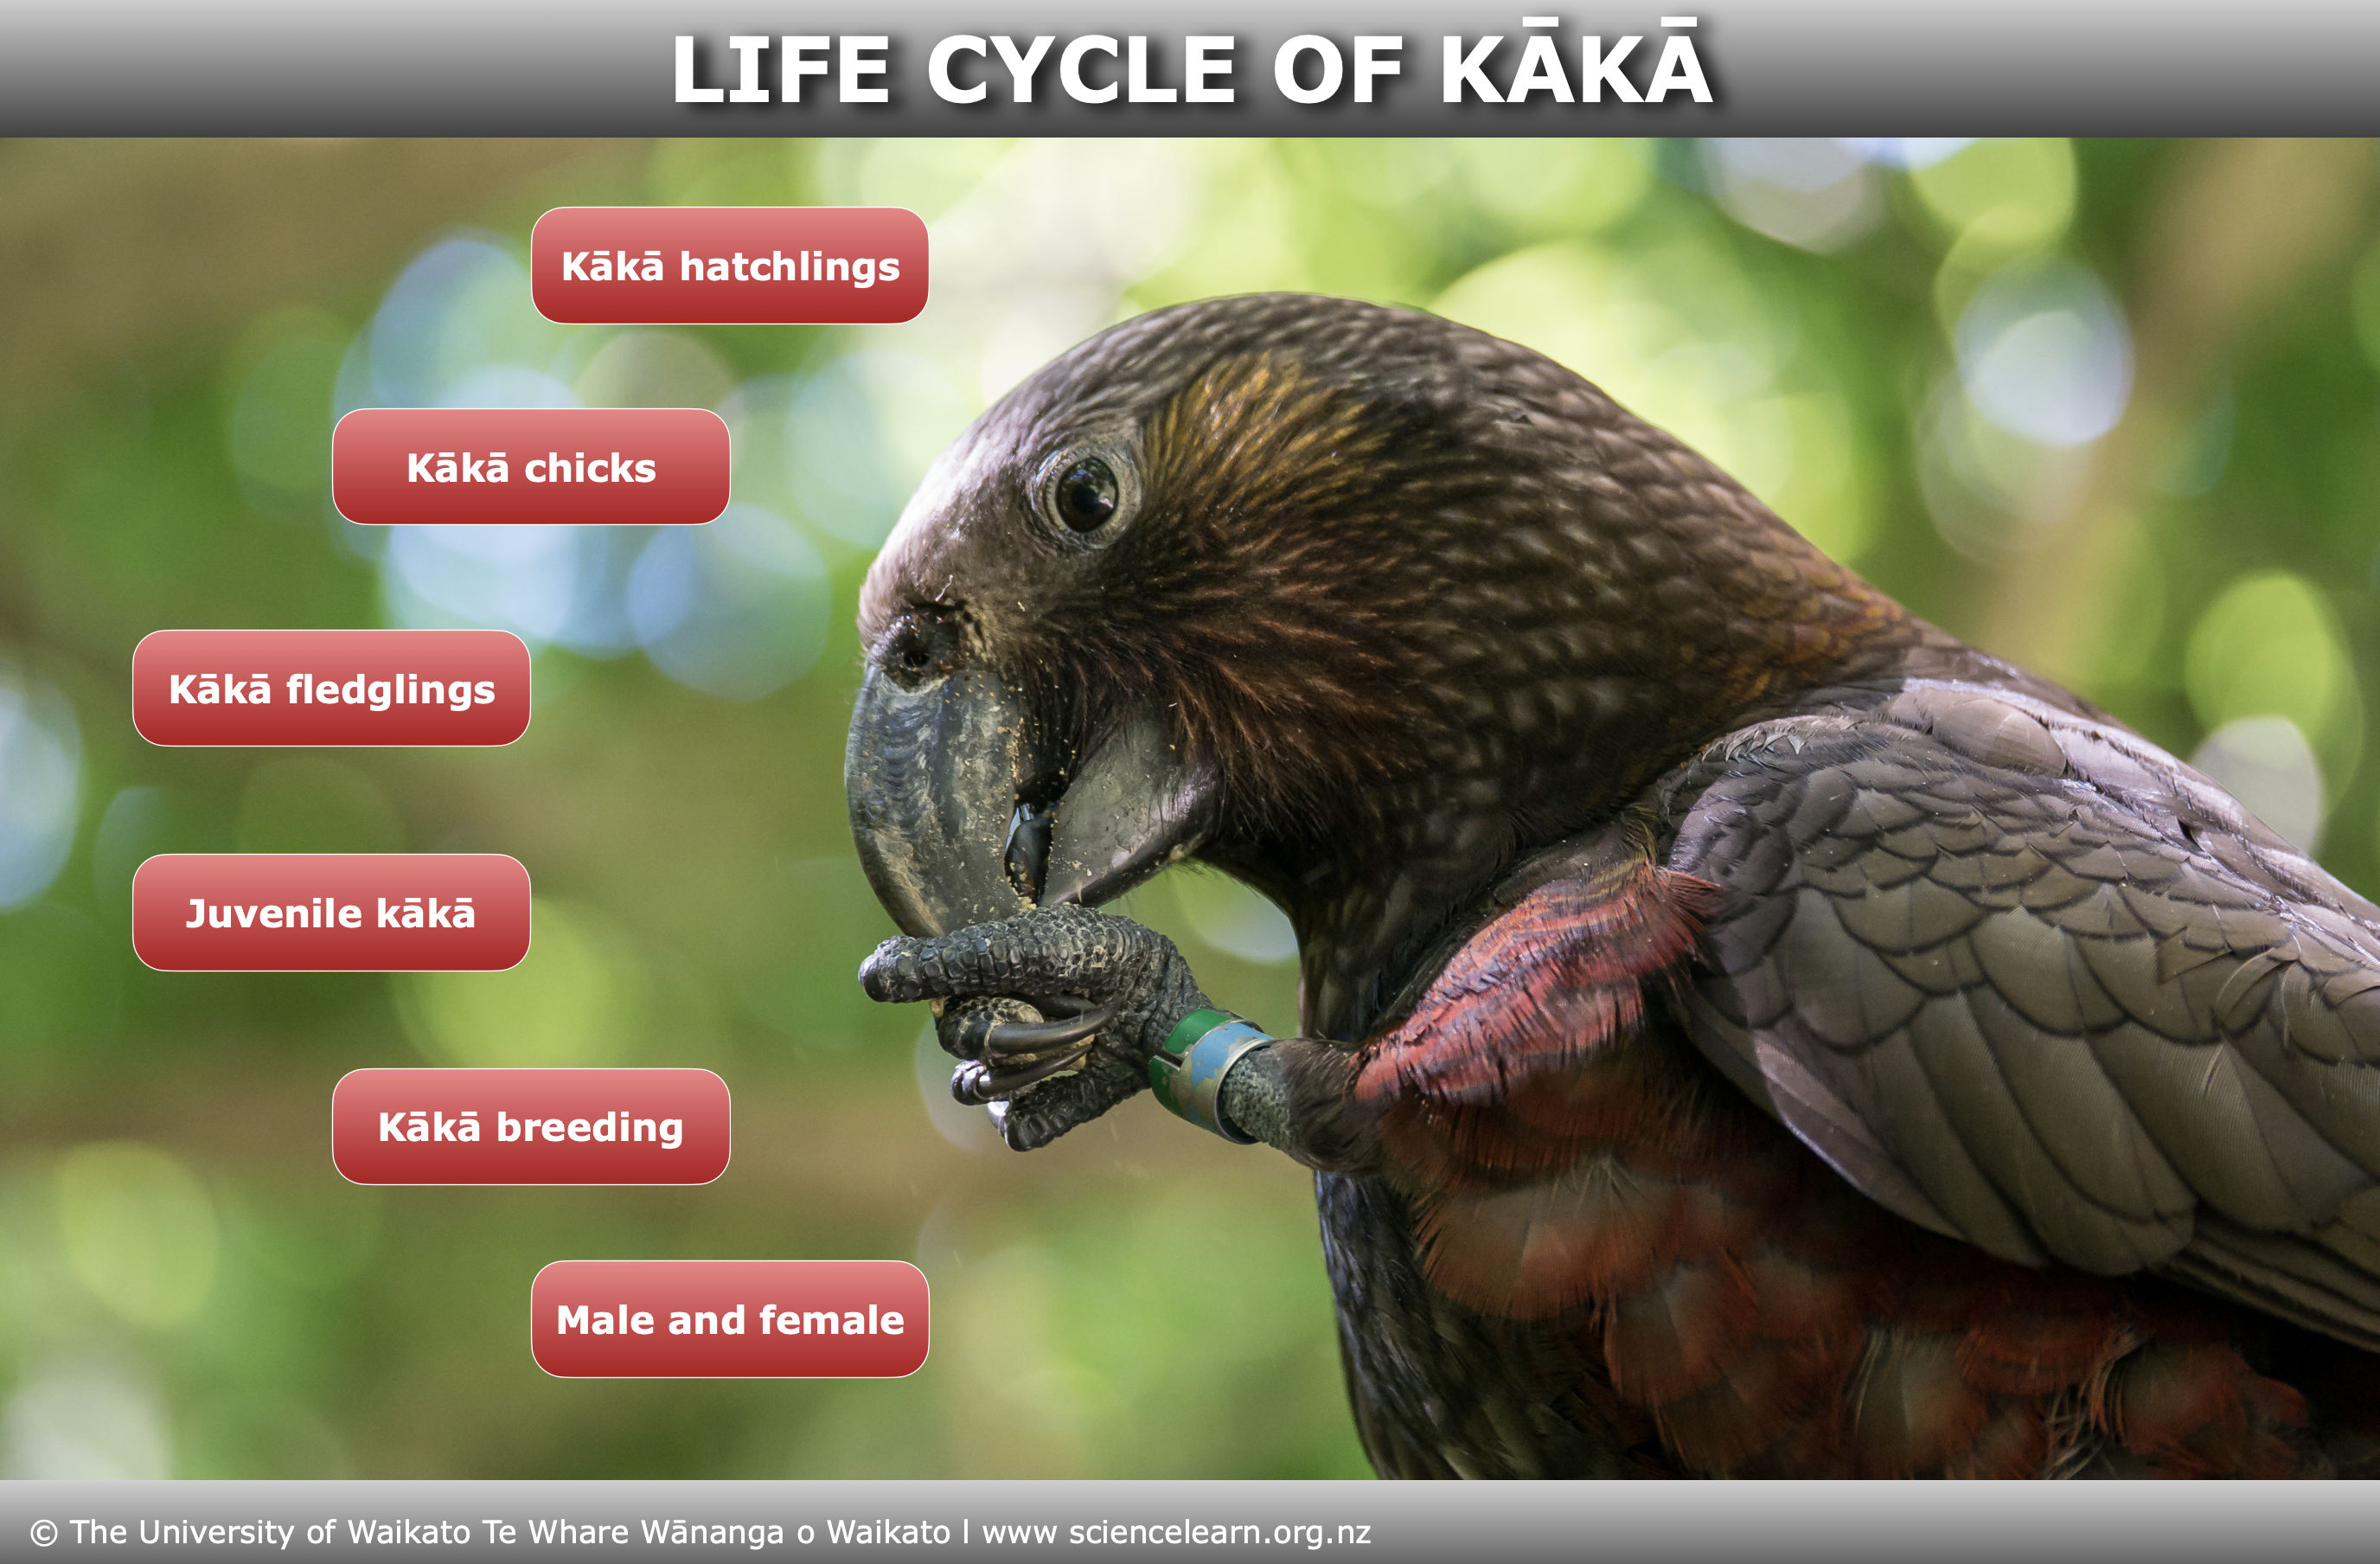 Explore the life cycle of the kākā from egg to adulthood in this interactive image map.